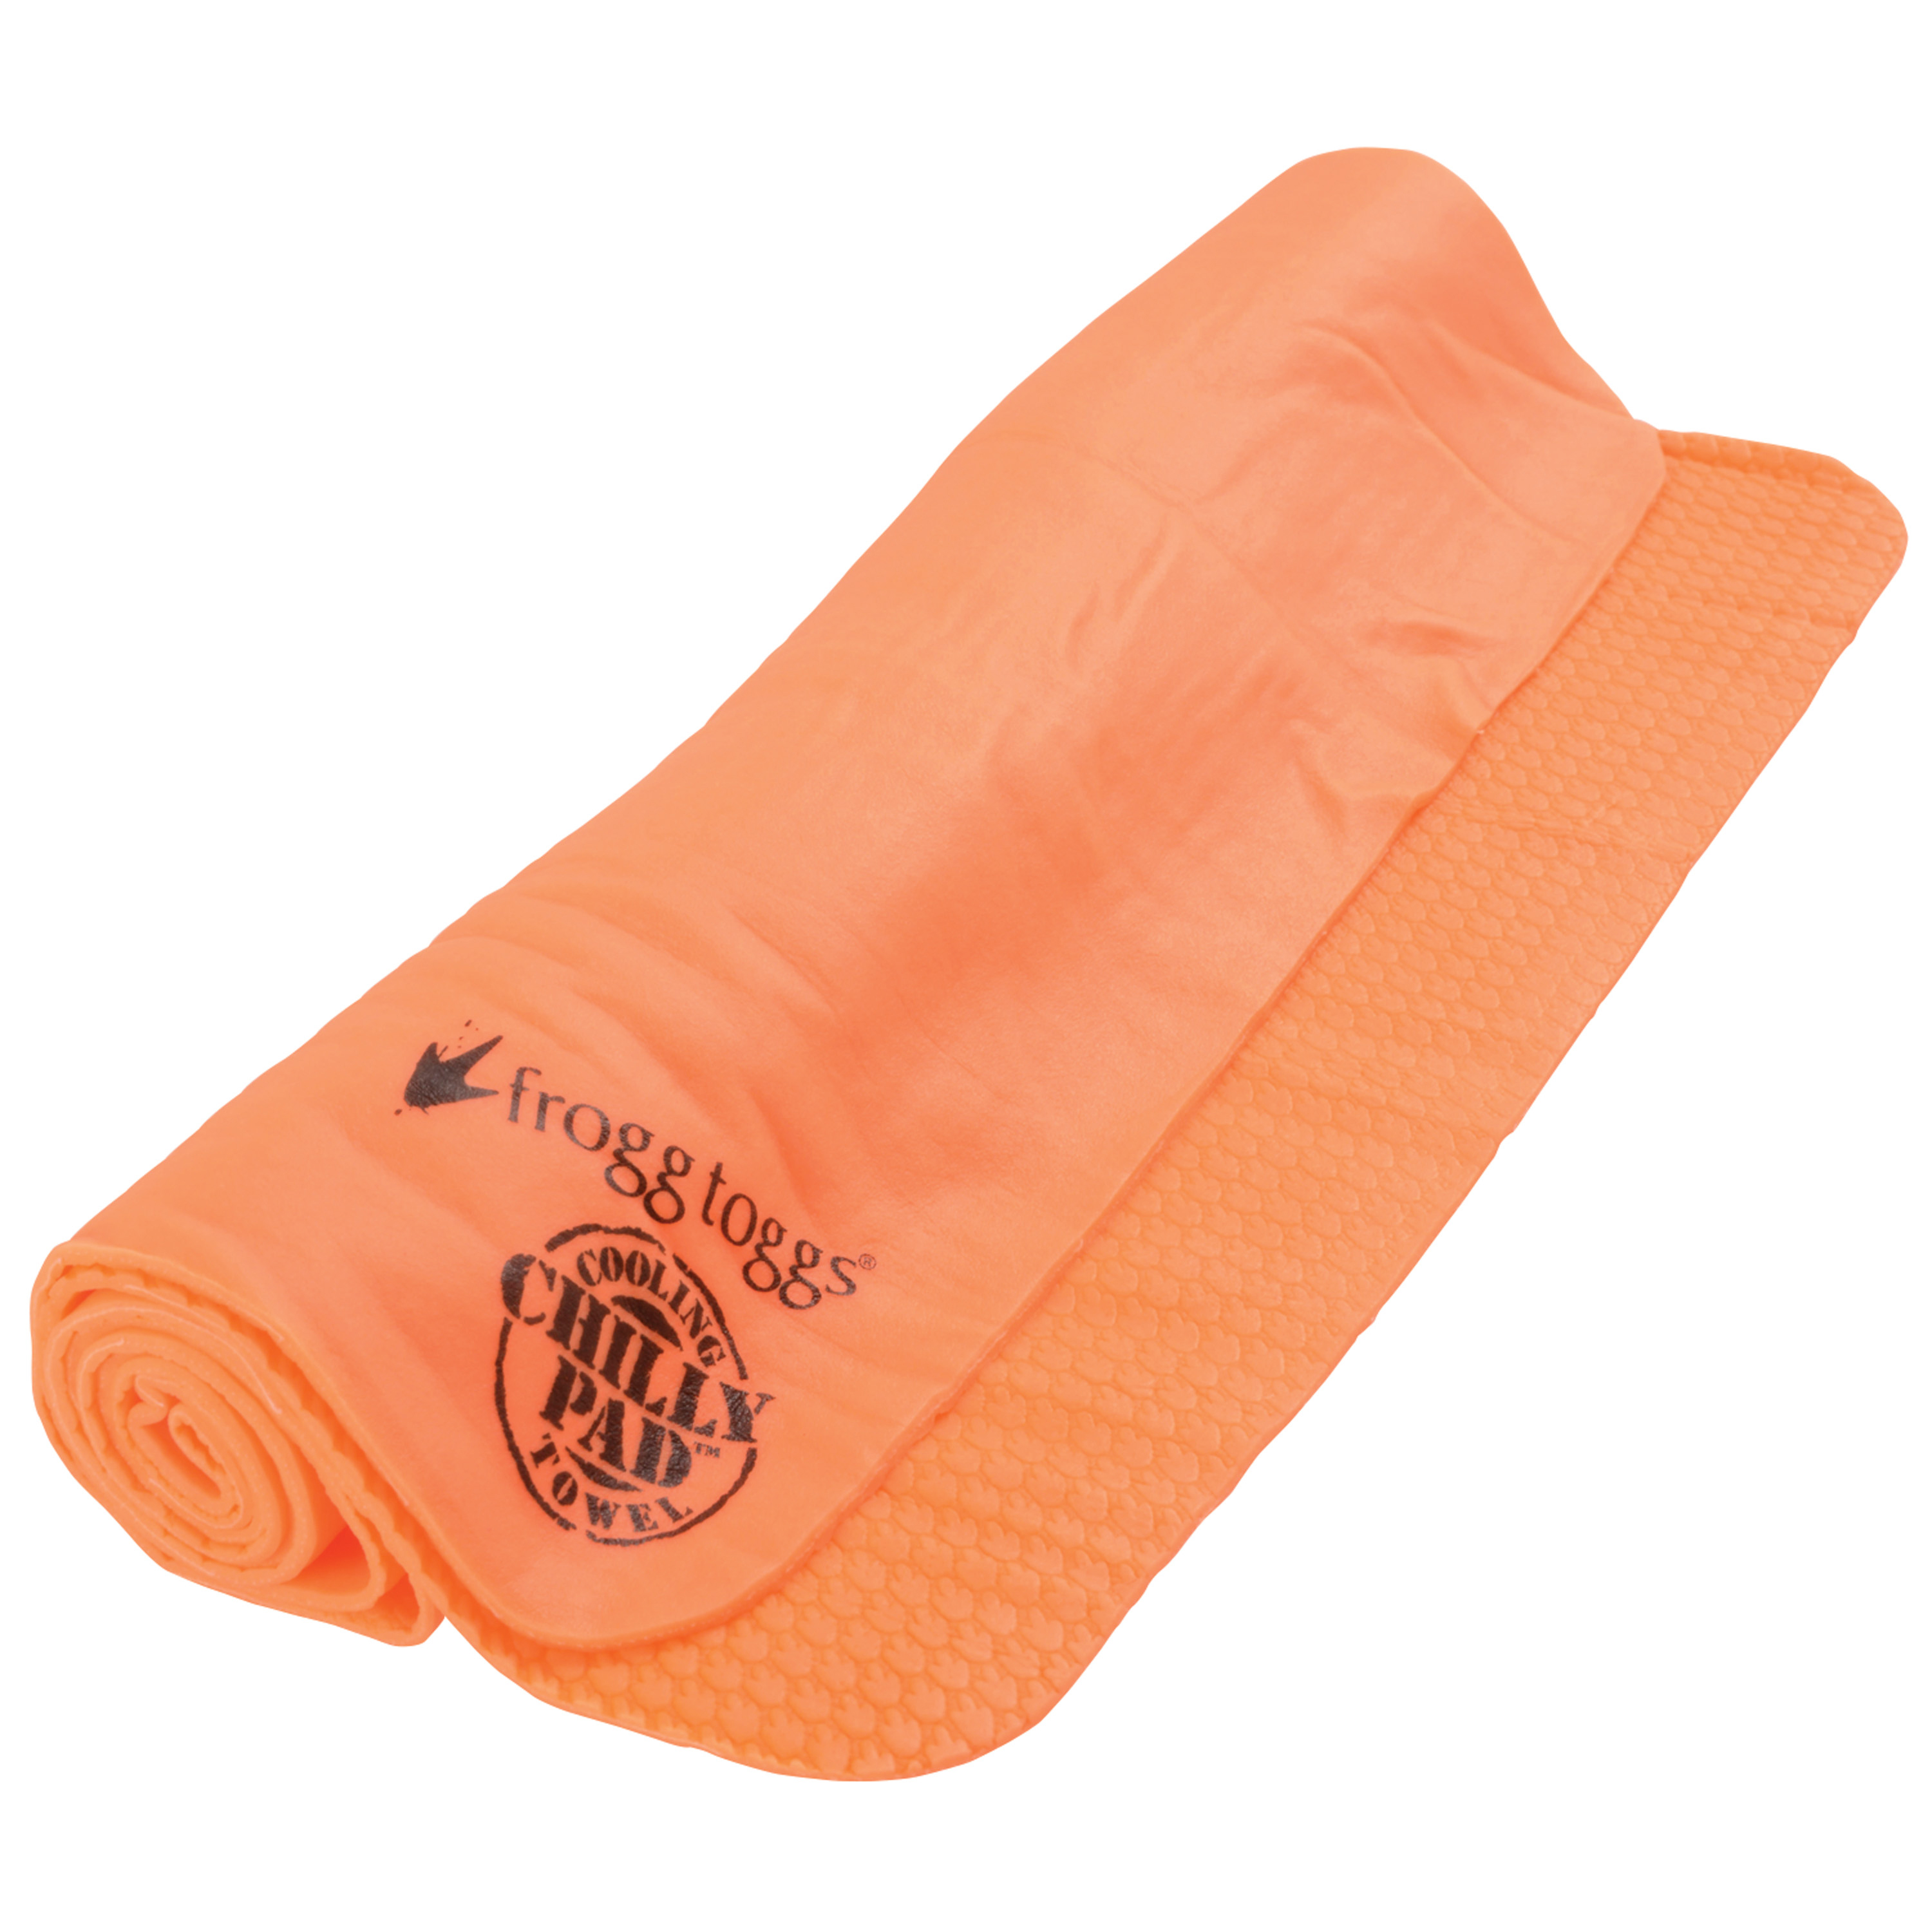 Frogg Togg Chilly Pad Cooling Towel